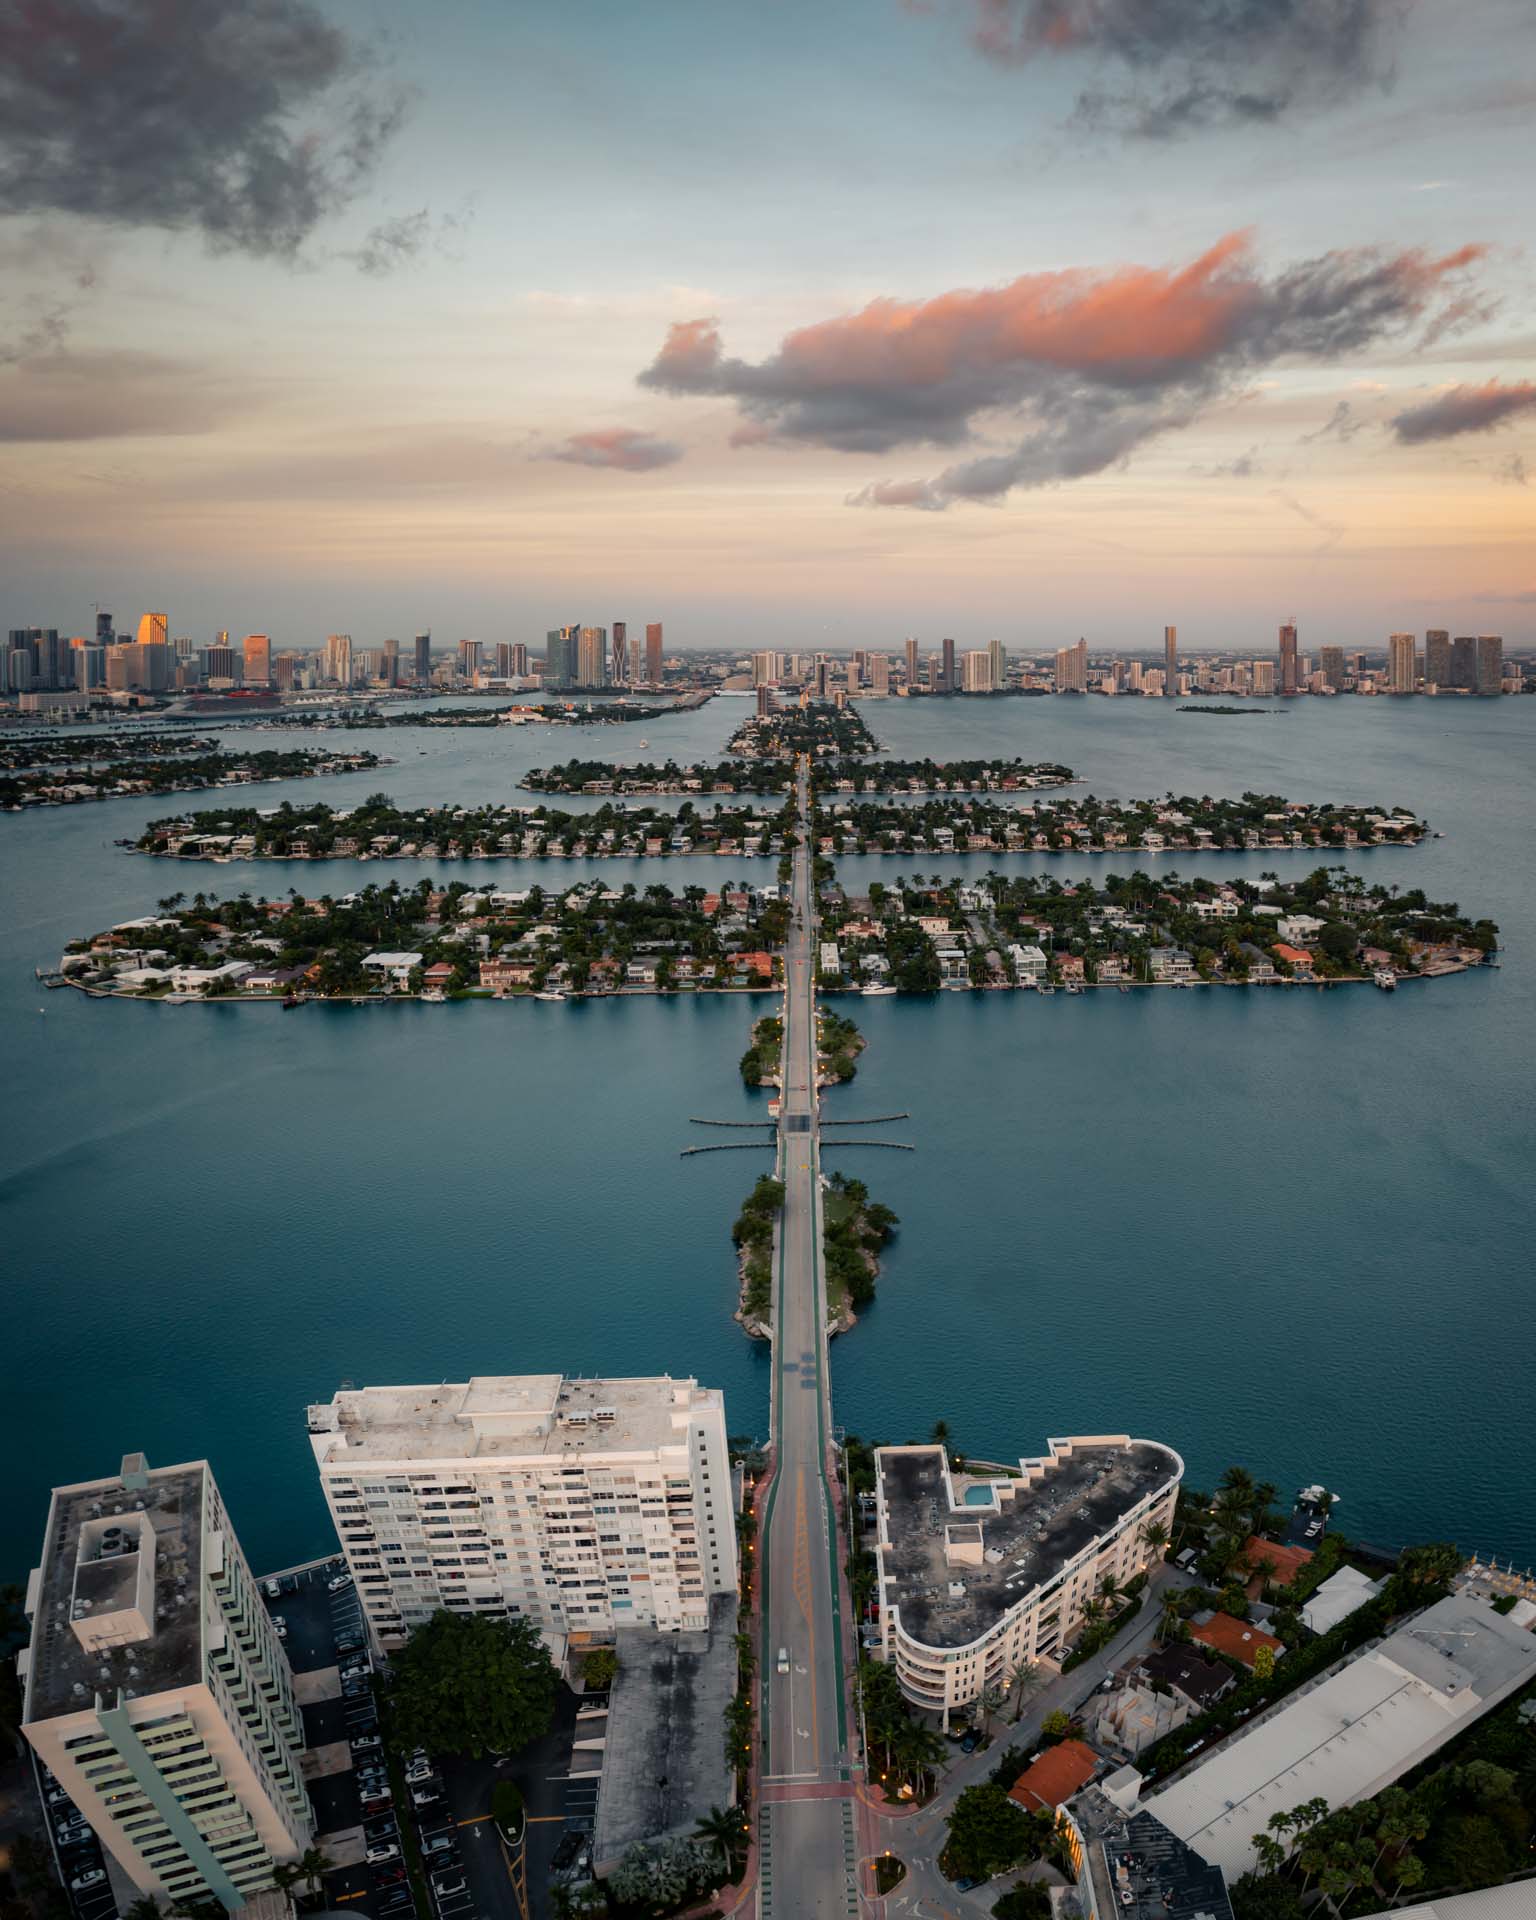 things to do in miami, fun things to do in miami, miami attractions, best things to do in miami, places to visit in miami, places to go in miami, things to do in miami florida